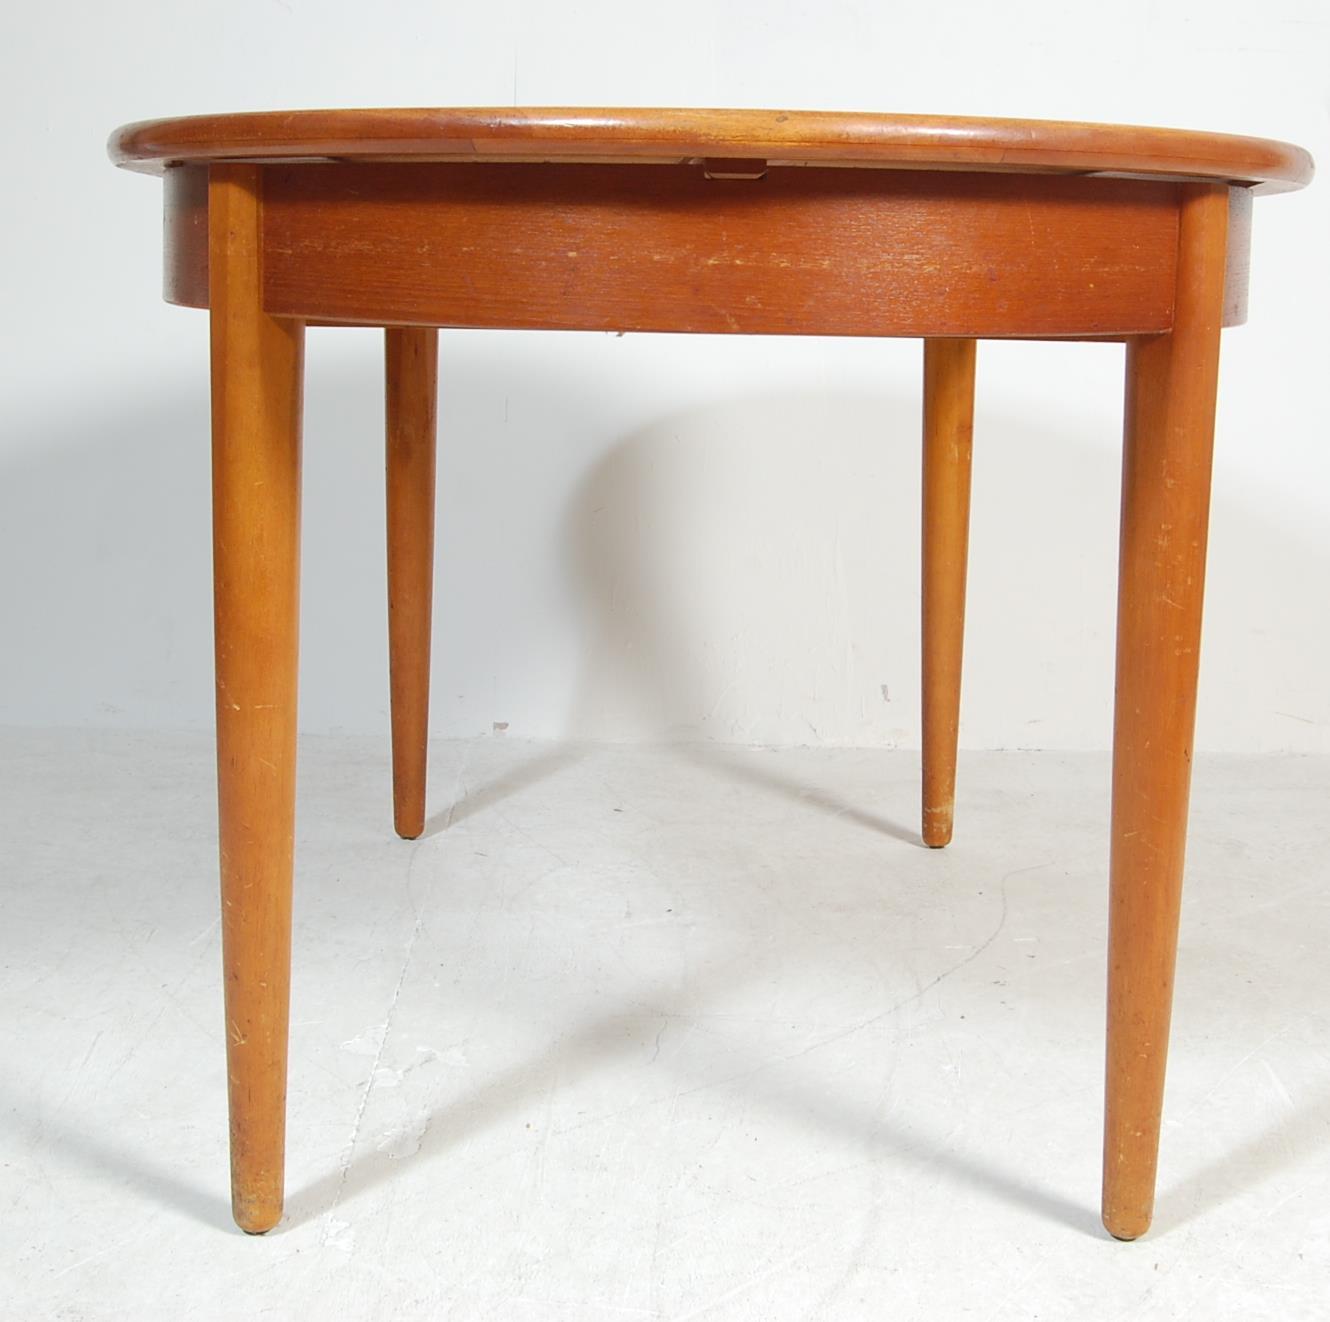 RETRO VINTAGE 1970S EXTENDABLE TEAK DINING TABLE - Image 4 of 6